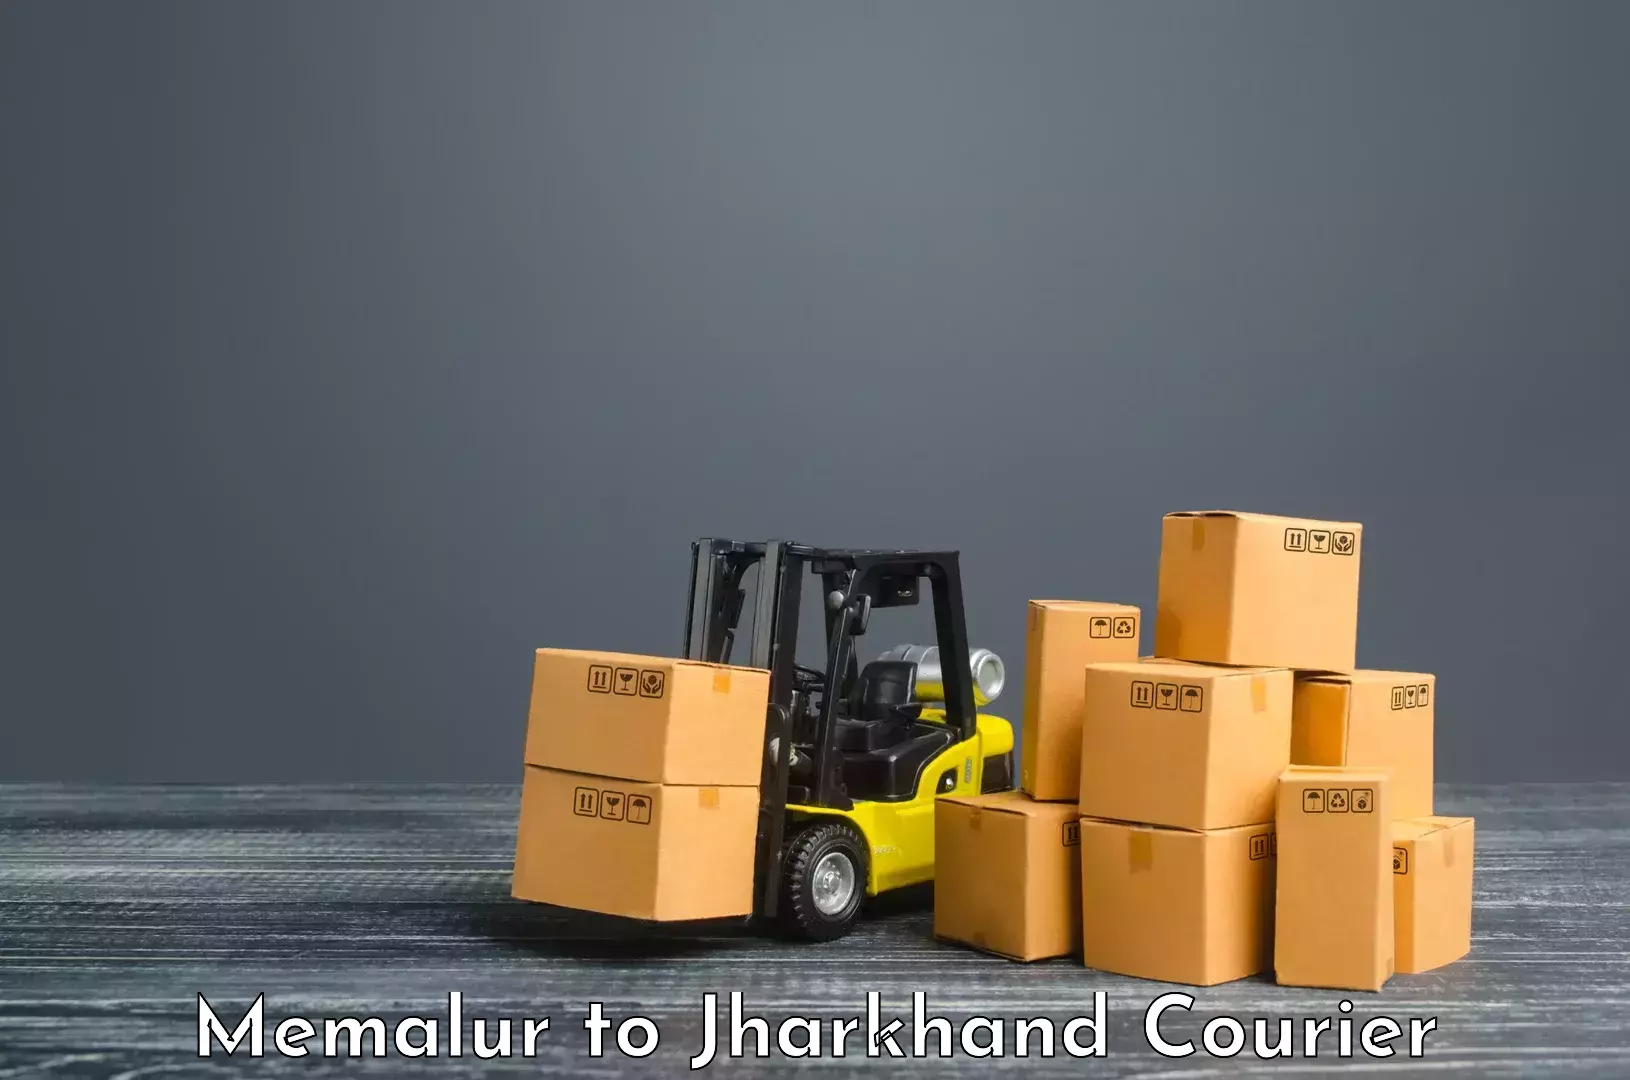 End-to-end delivery in Memalur to Jamshedpur